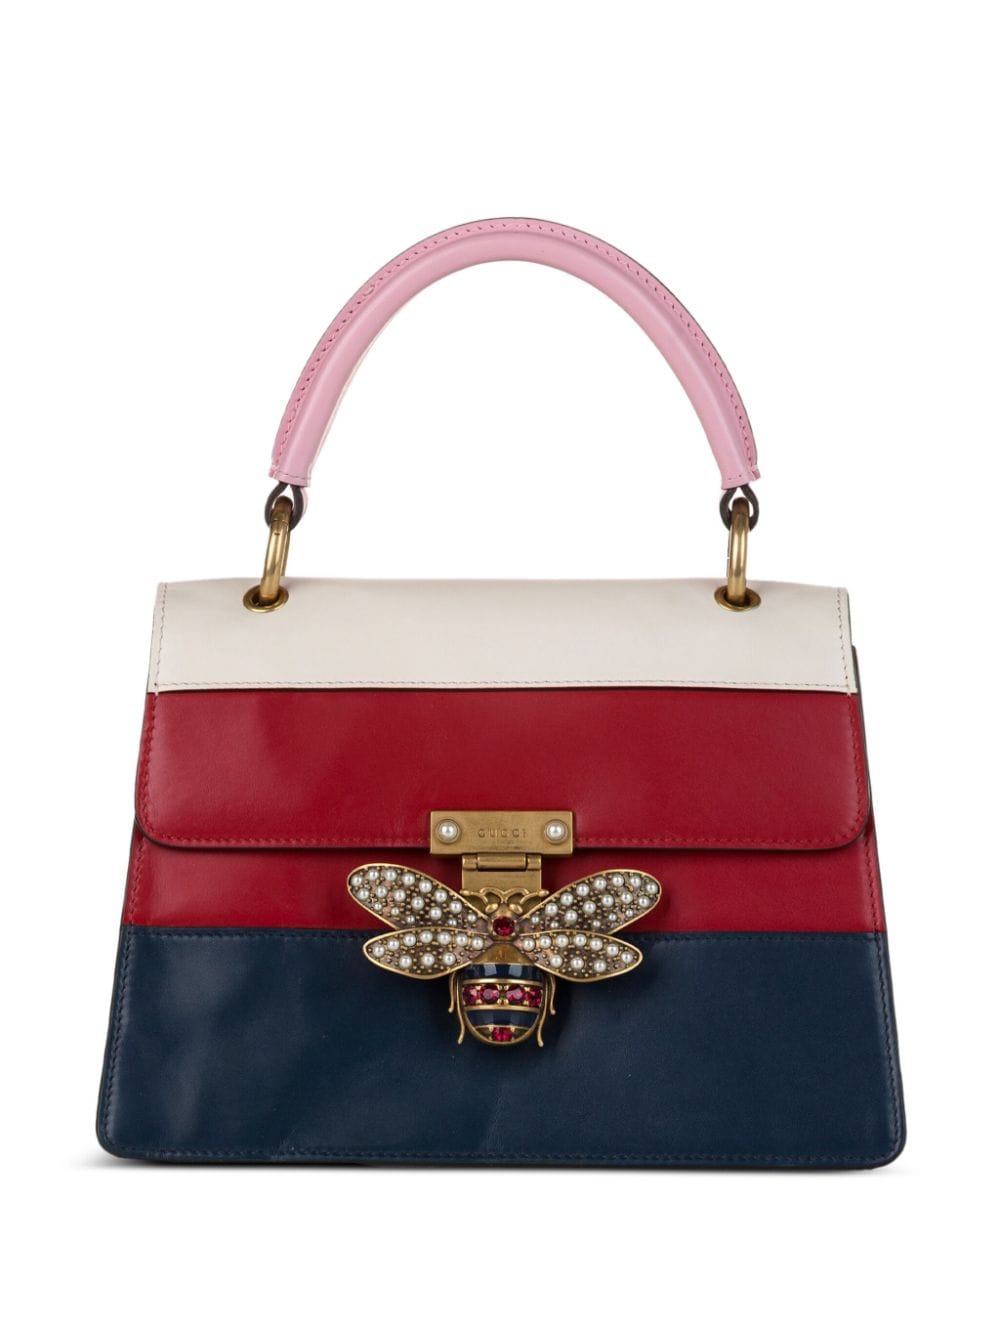 Gucci Queen Margaret Leather Top Handle Bag - Farfetch